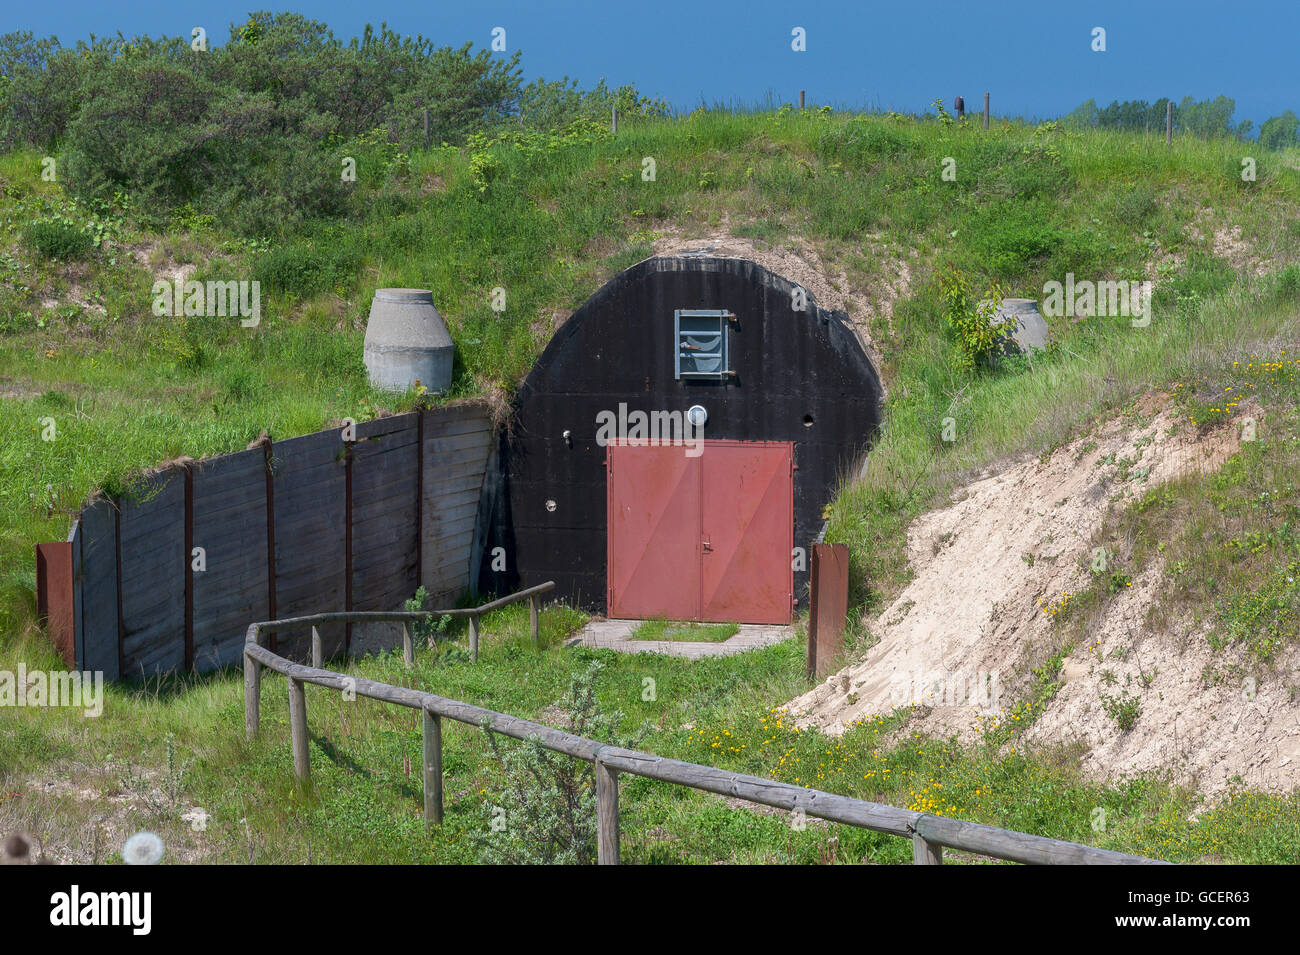 Marine bunker Kap Arkona, operated by the NVA and the Red Army 1986-1990 in the Cold War, Rügen Island Stock Photo